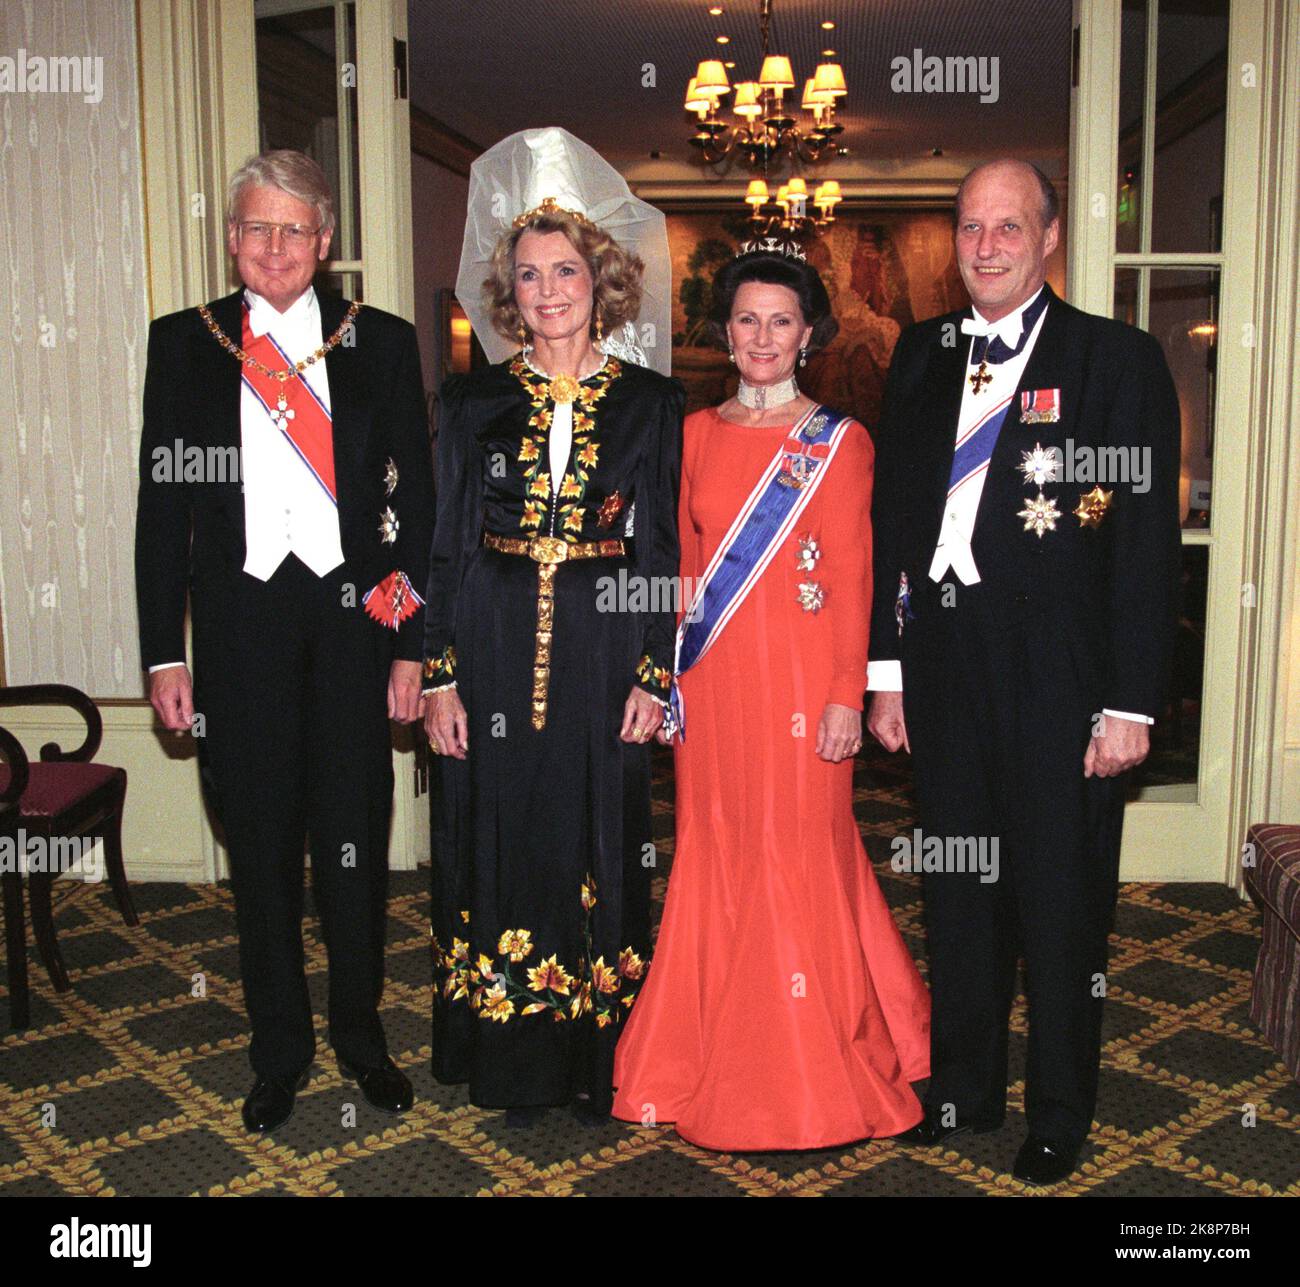 Oslo 19970213: The royal couple photographed with Iceland's President Olafur Ragnar Grimsson and Mrs. Gudrun Katrin Thorbergsdottir (t.v.) during the Gallama Day at the Grand Hotel. Queen Sonja in red dress with the maltese diadem (three crosses) in the hair. Photo: Morten Holm NTB / NTB Stock Photo